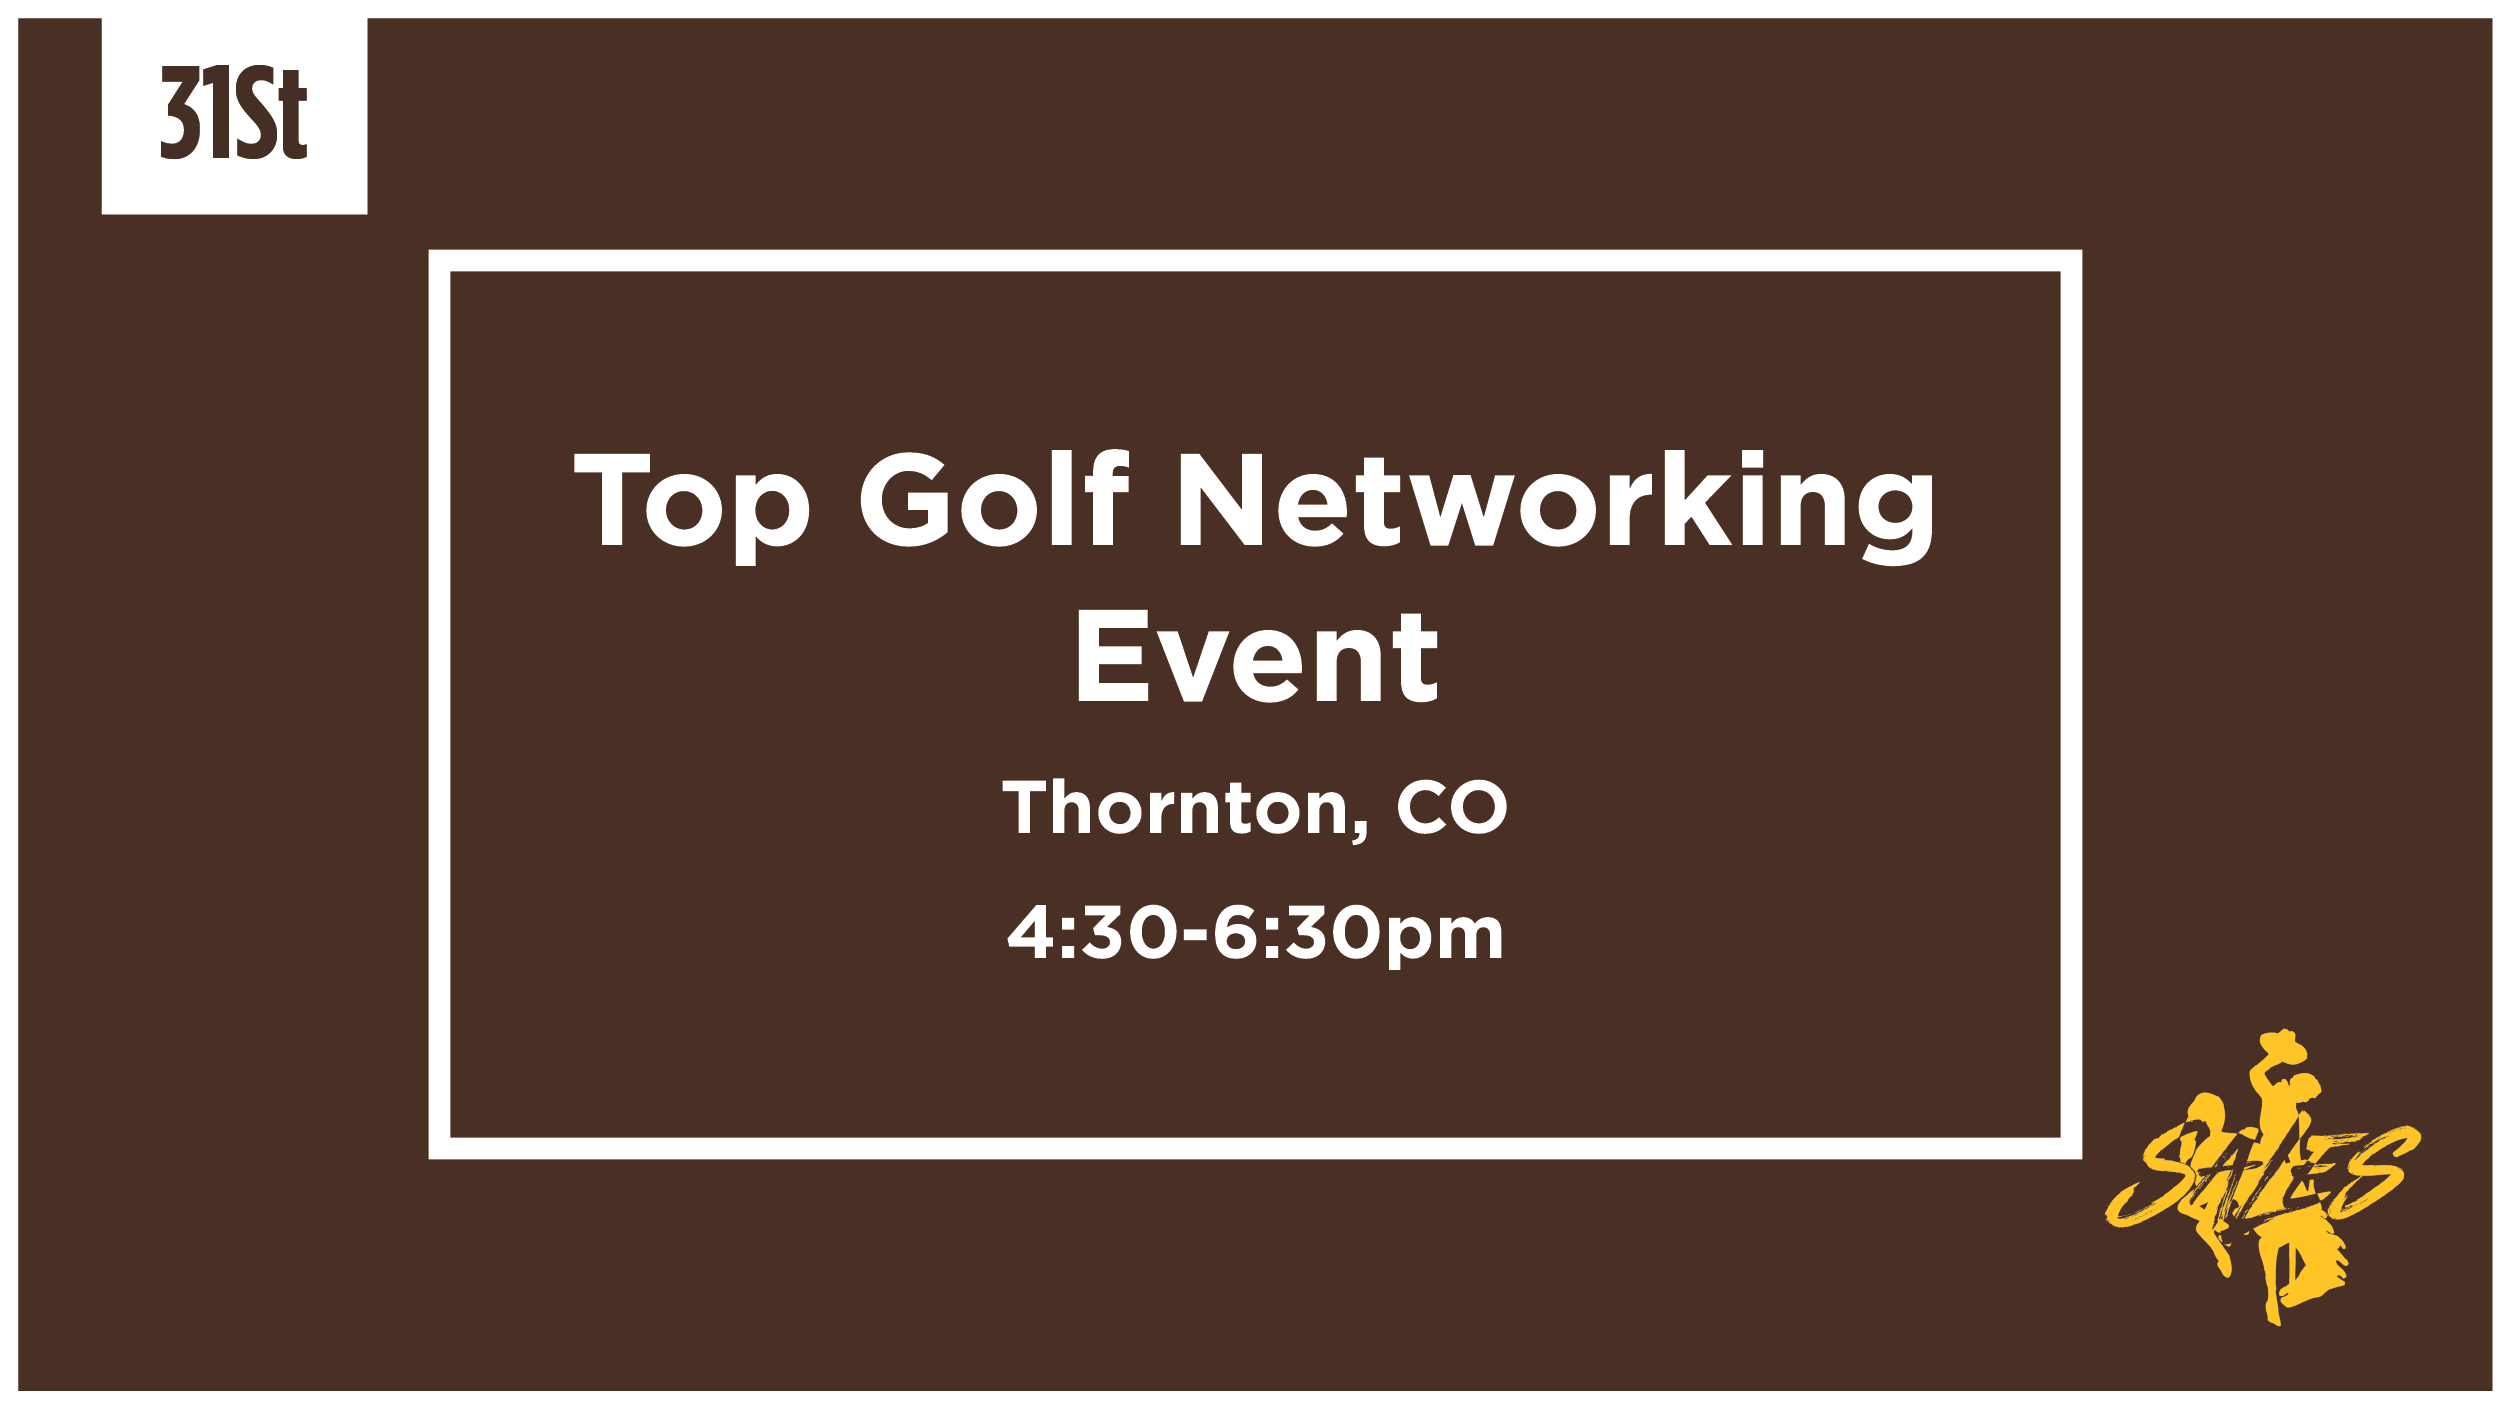 Top Golf Networking Event